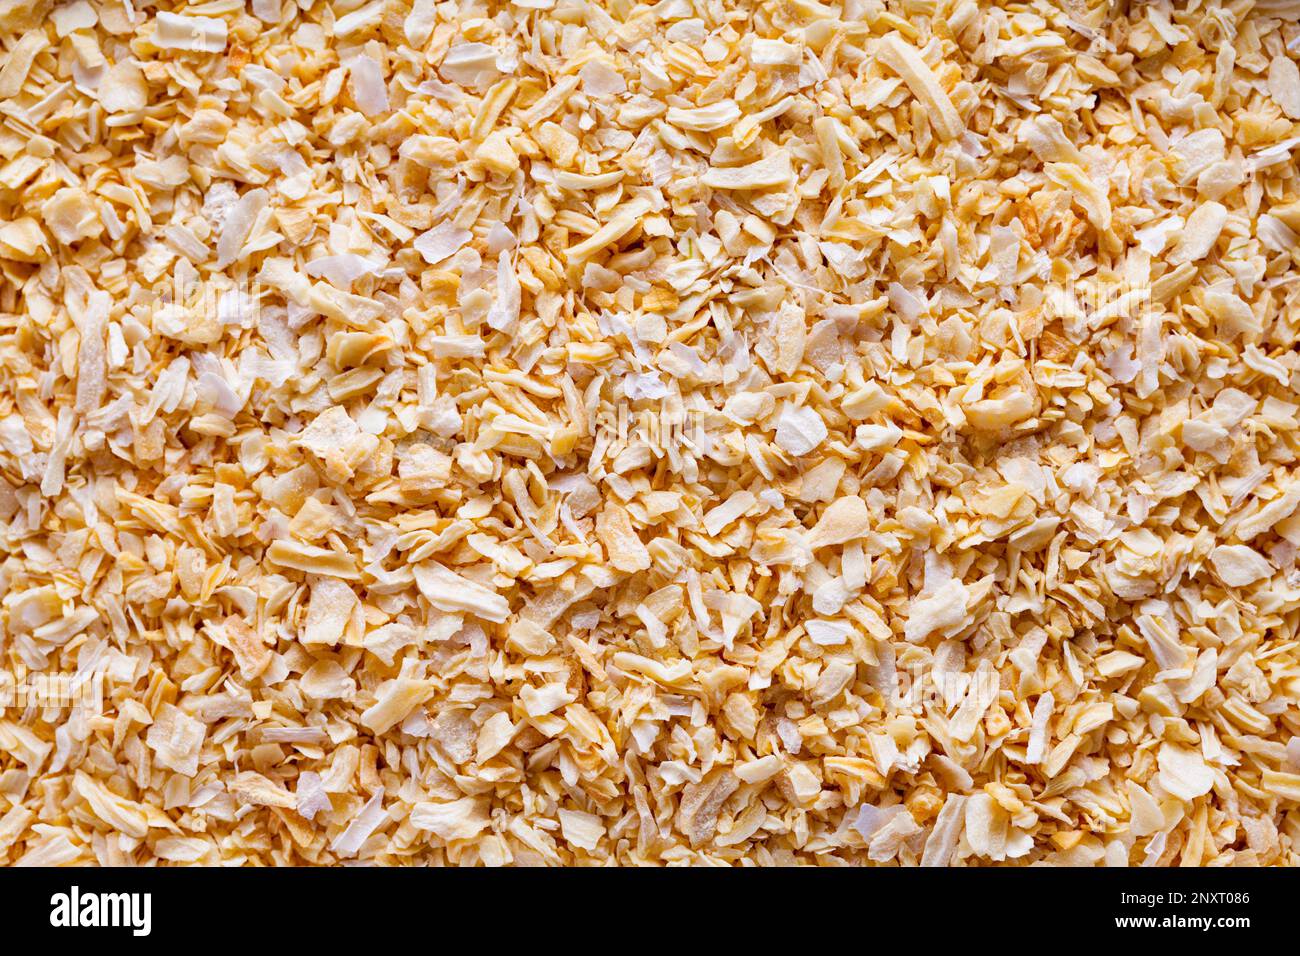 Heap of Dry Onion Flakes Background Close Up. Stock Photo